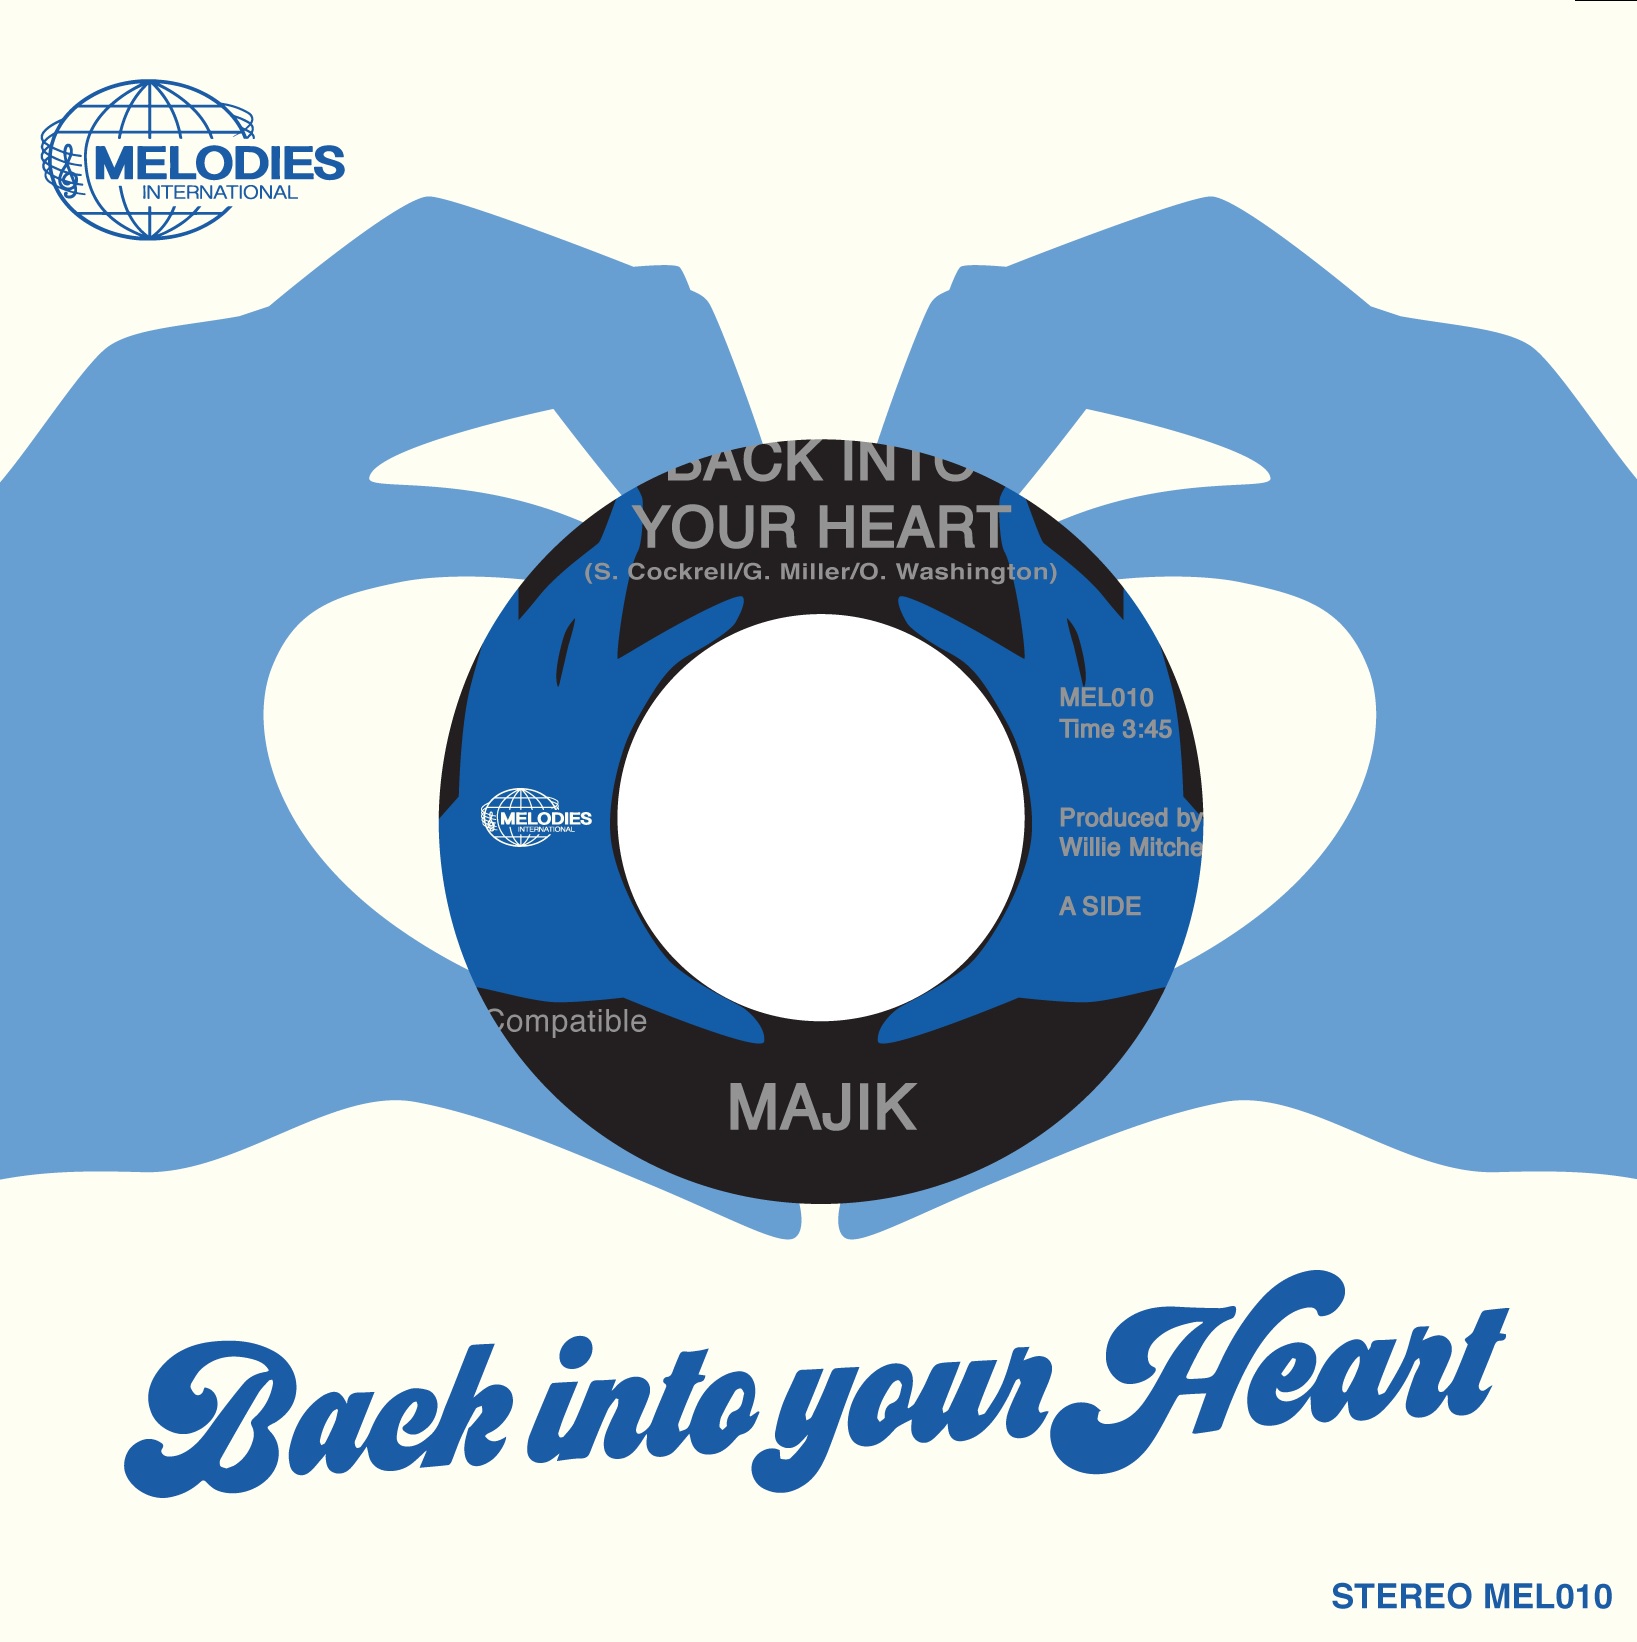 Majik/BACK INTO YOUR HEART 7"